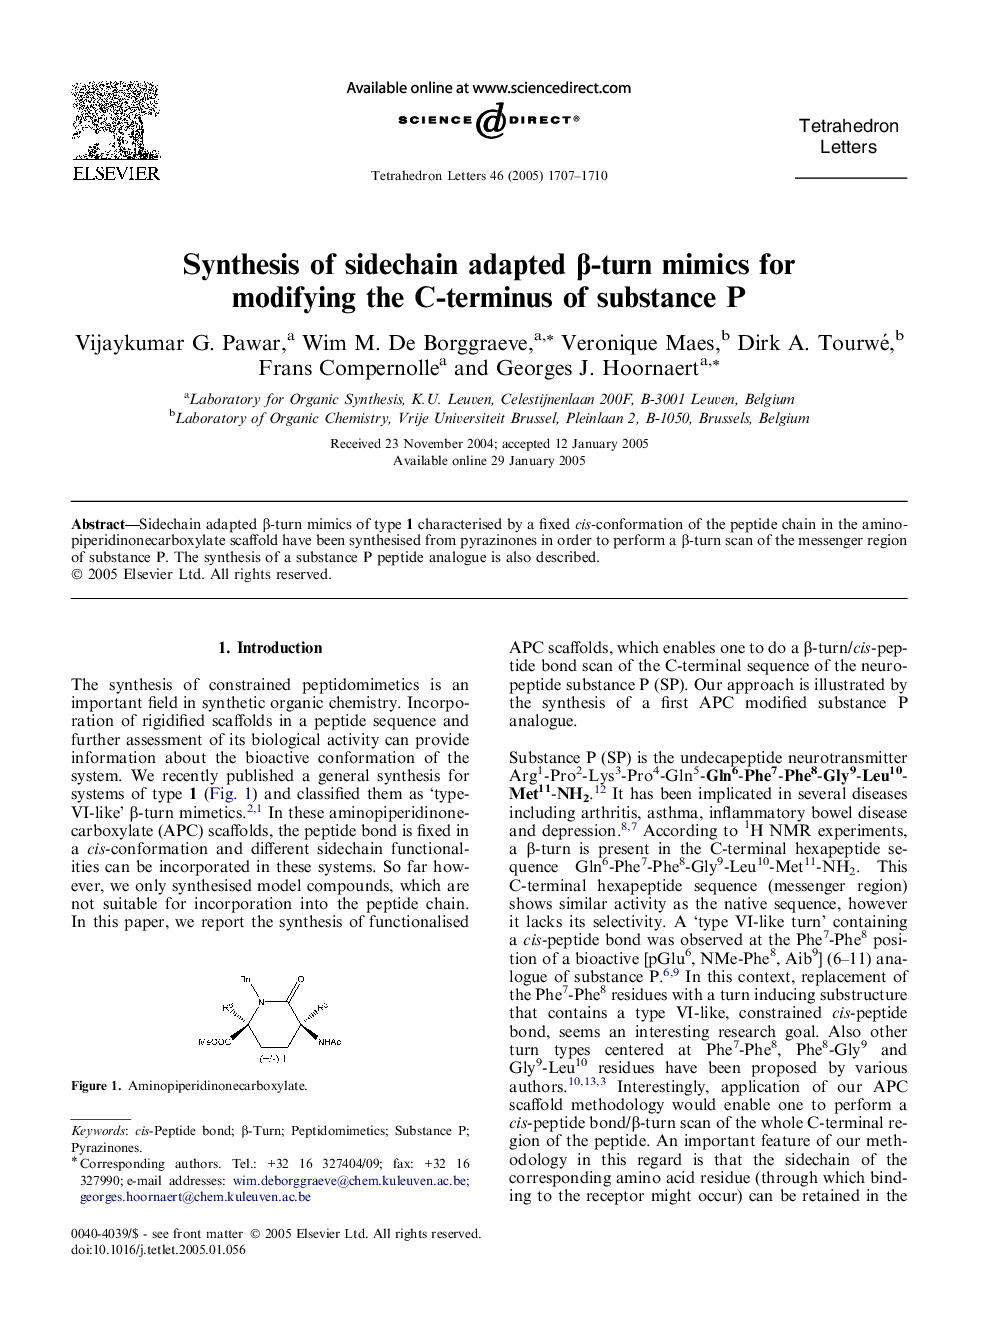 Synthesis of sidechain adapted Î²-turn mimics for modifying the C-terminus of substance P